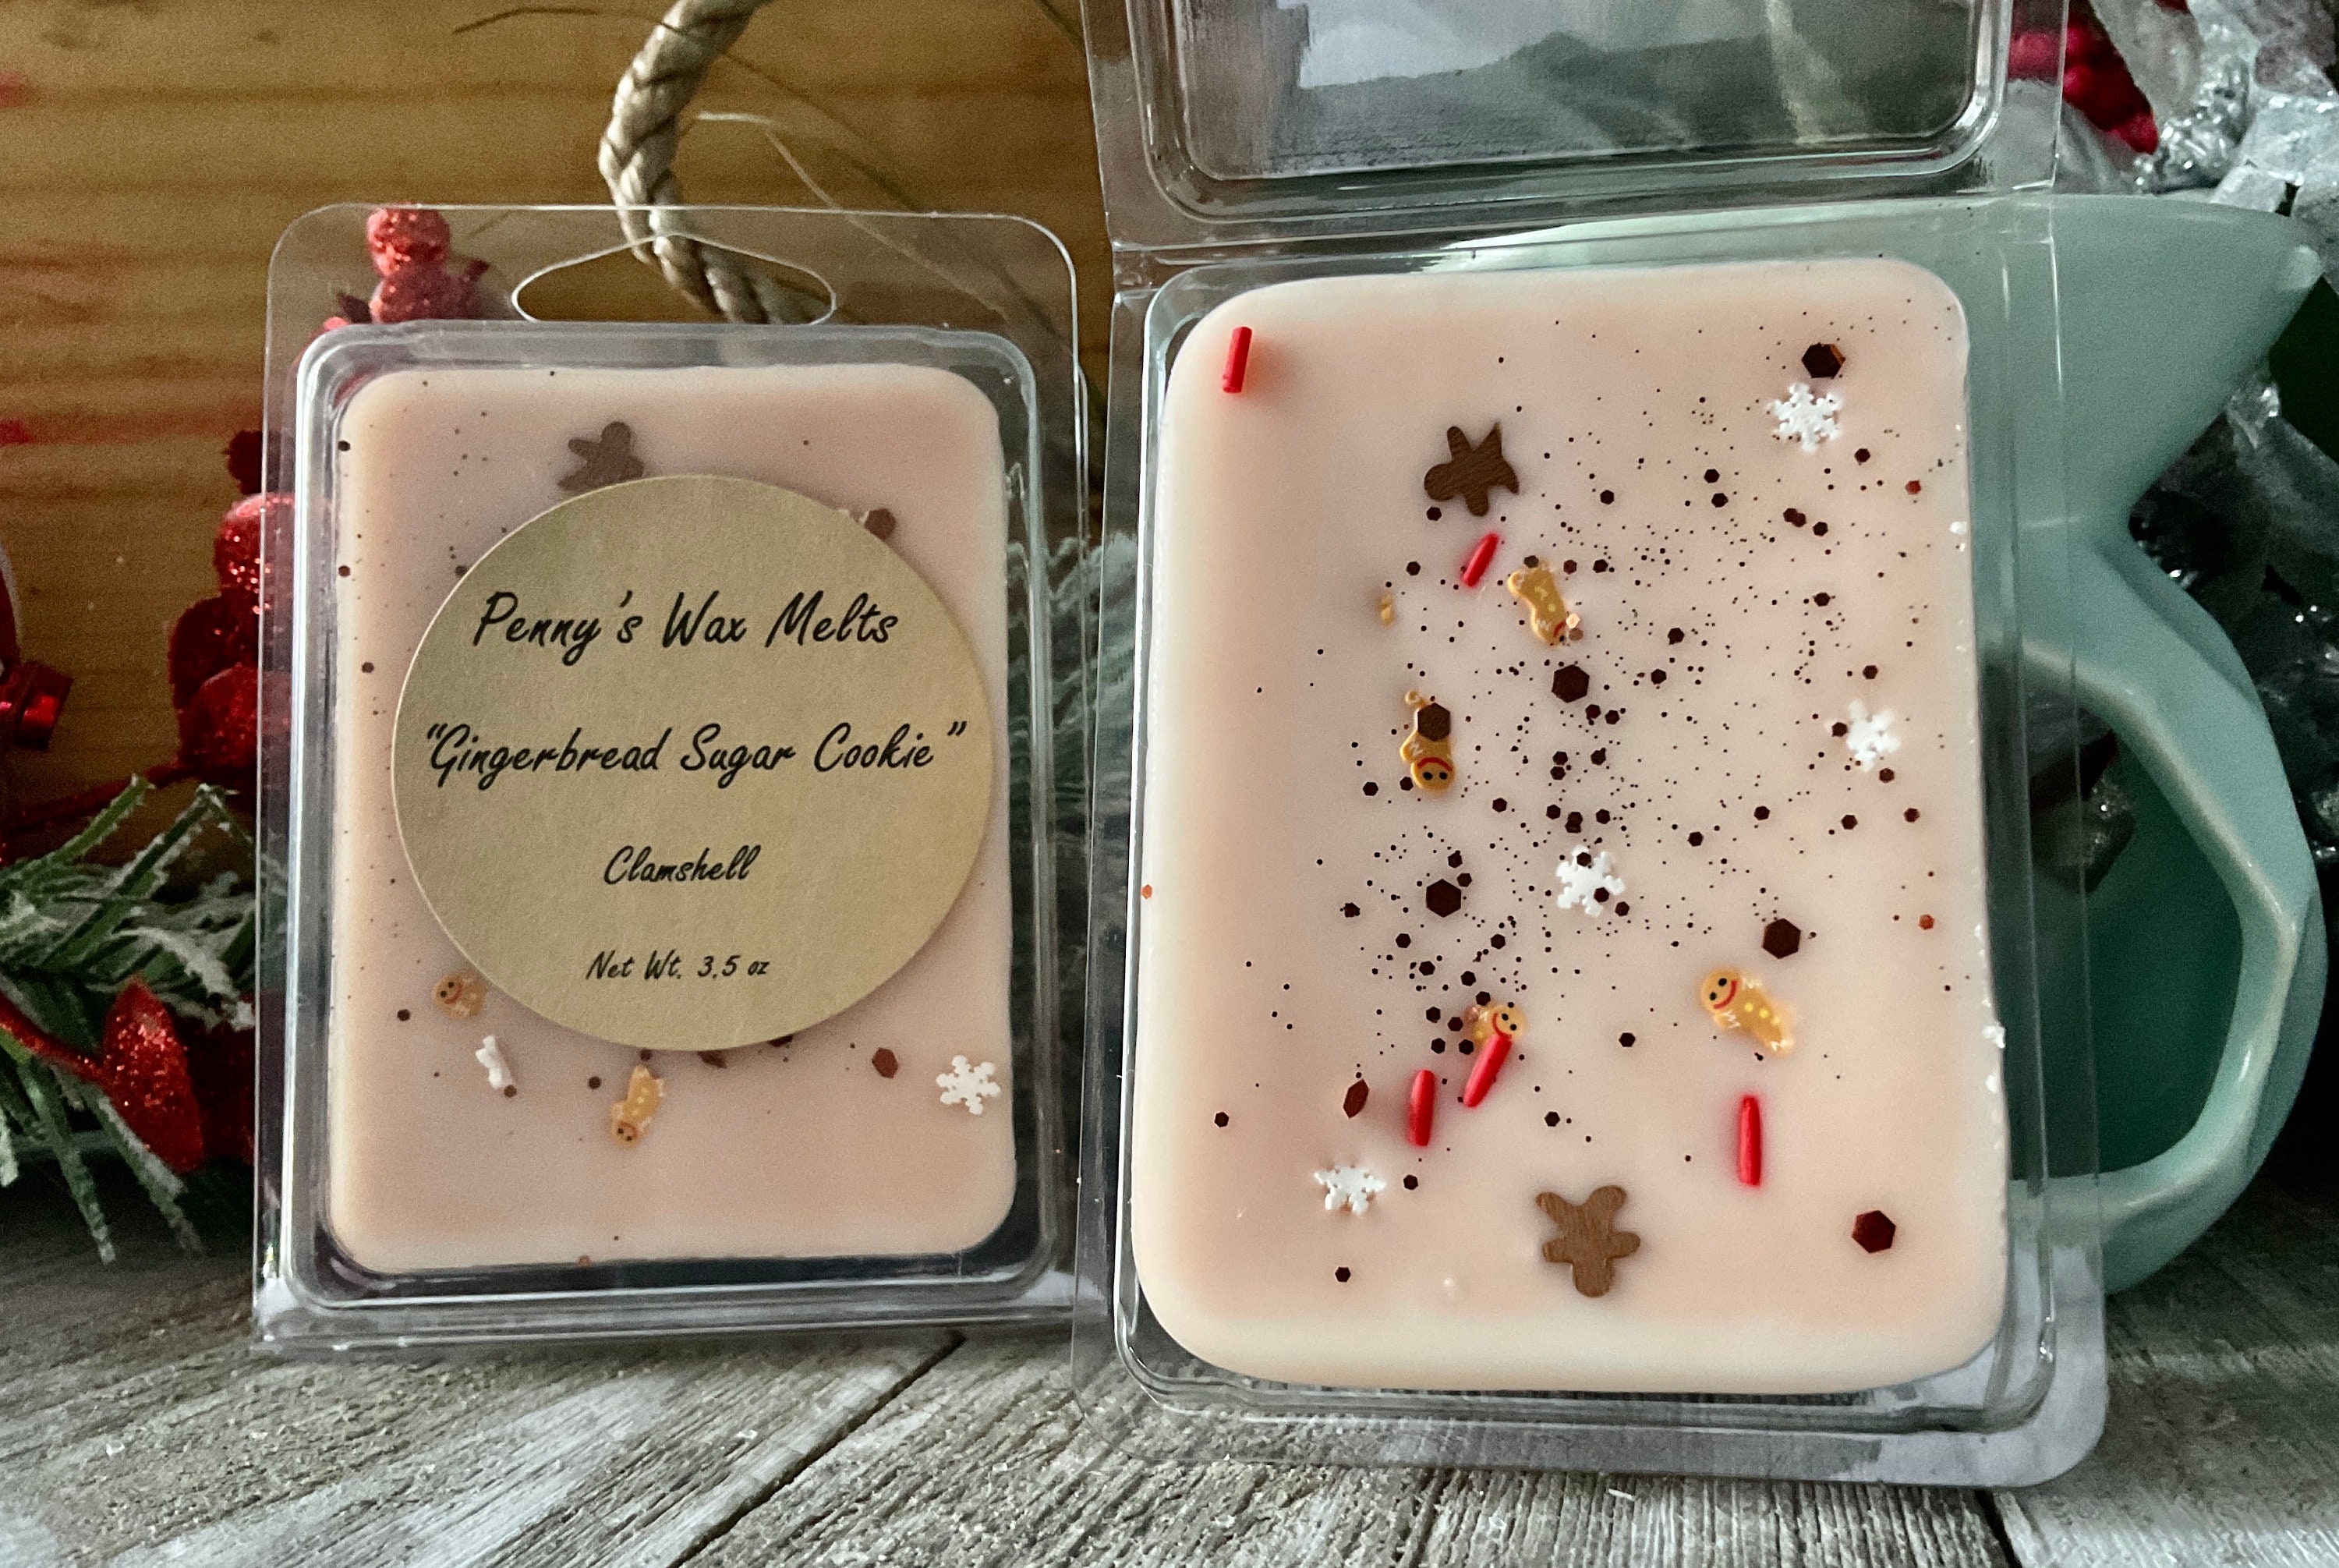 Winter Scented Wax Melts, Christmas Soy Wax Melts Gift Set, Wax Cubes/Tarts  for Warmer - Christmas Wreath, Gingerbread, Sugar Cookie, Peppermint